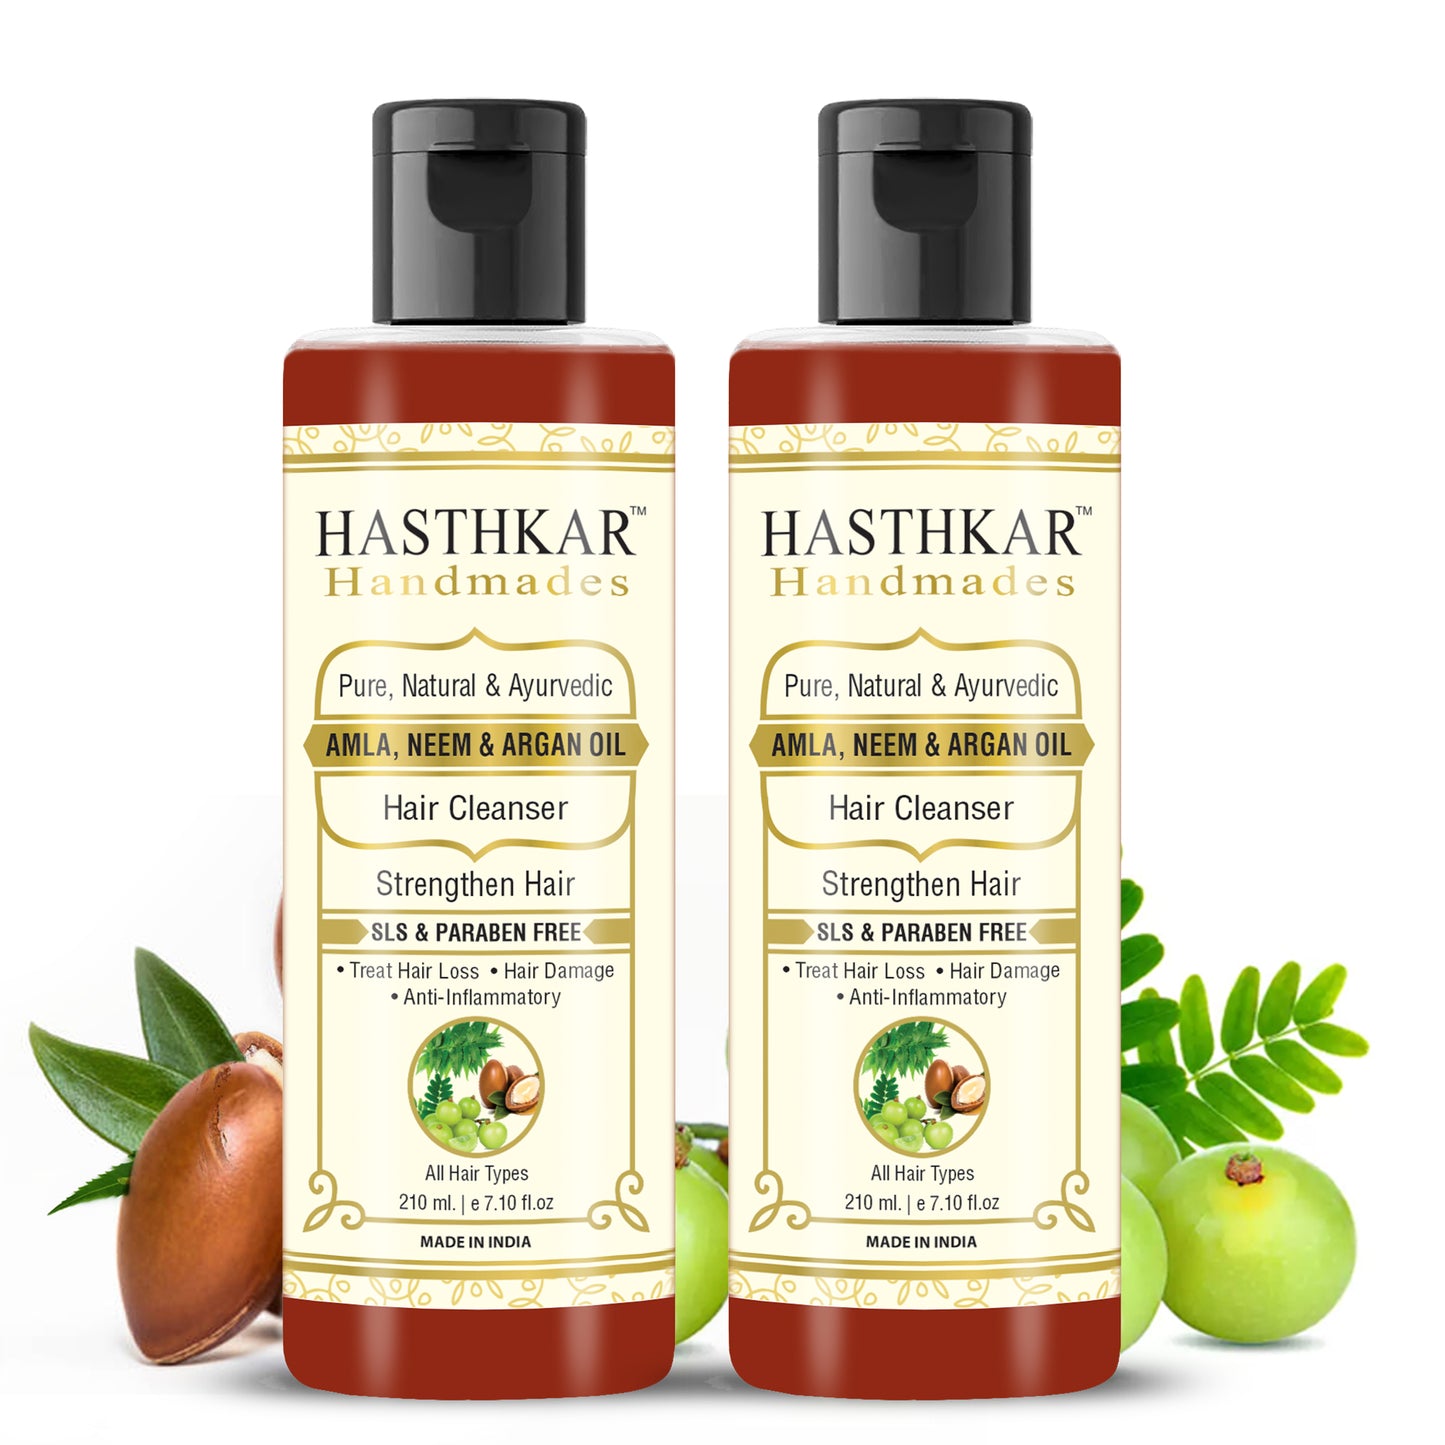 Hasthkar Handmade Strengthen Dameged and Hair Loss Shampoo with Amla Neem and Argan Oil - 210ml Pack of 2